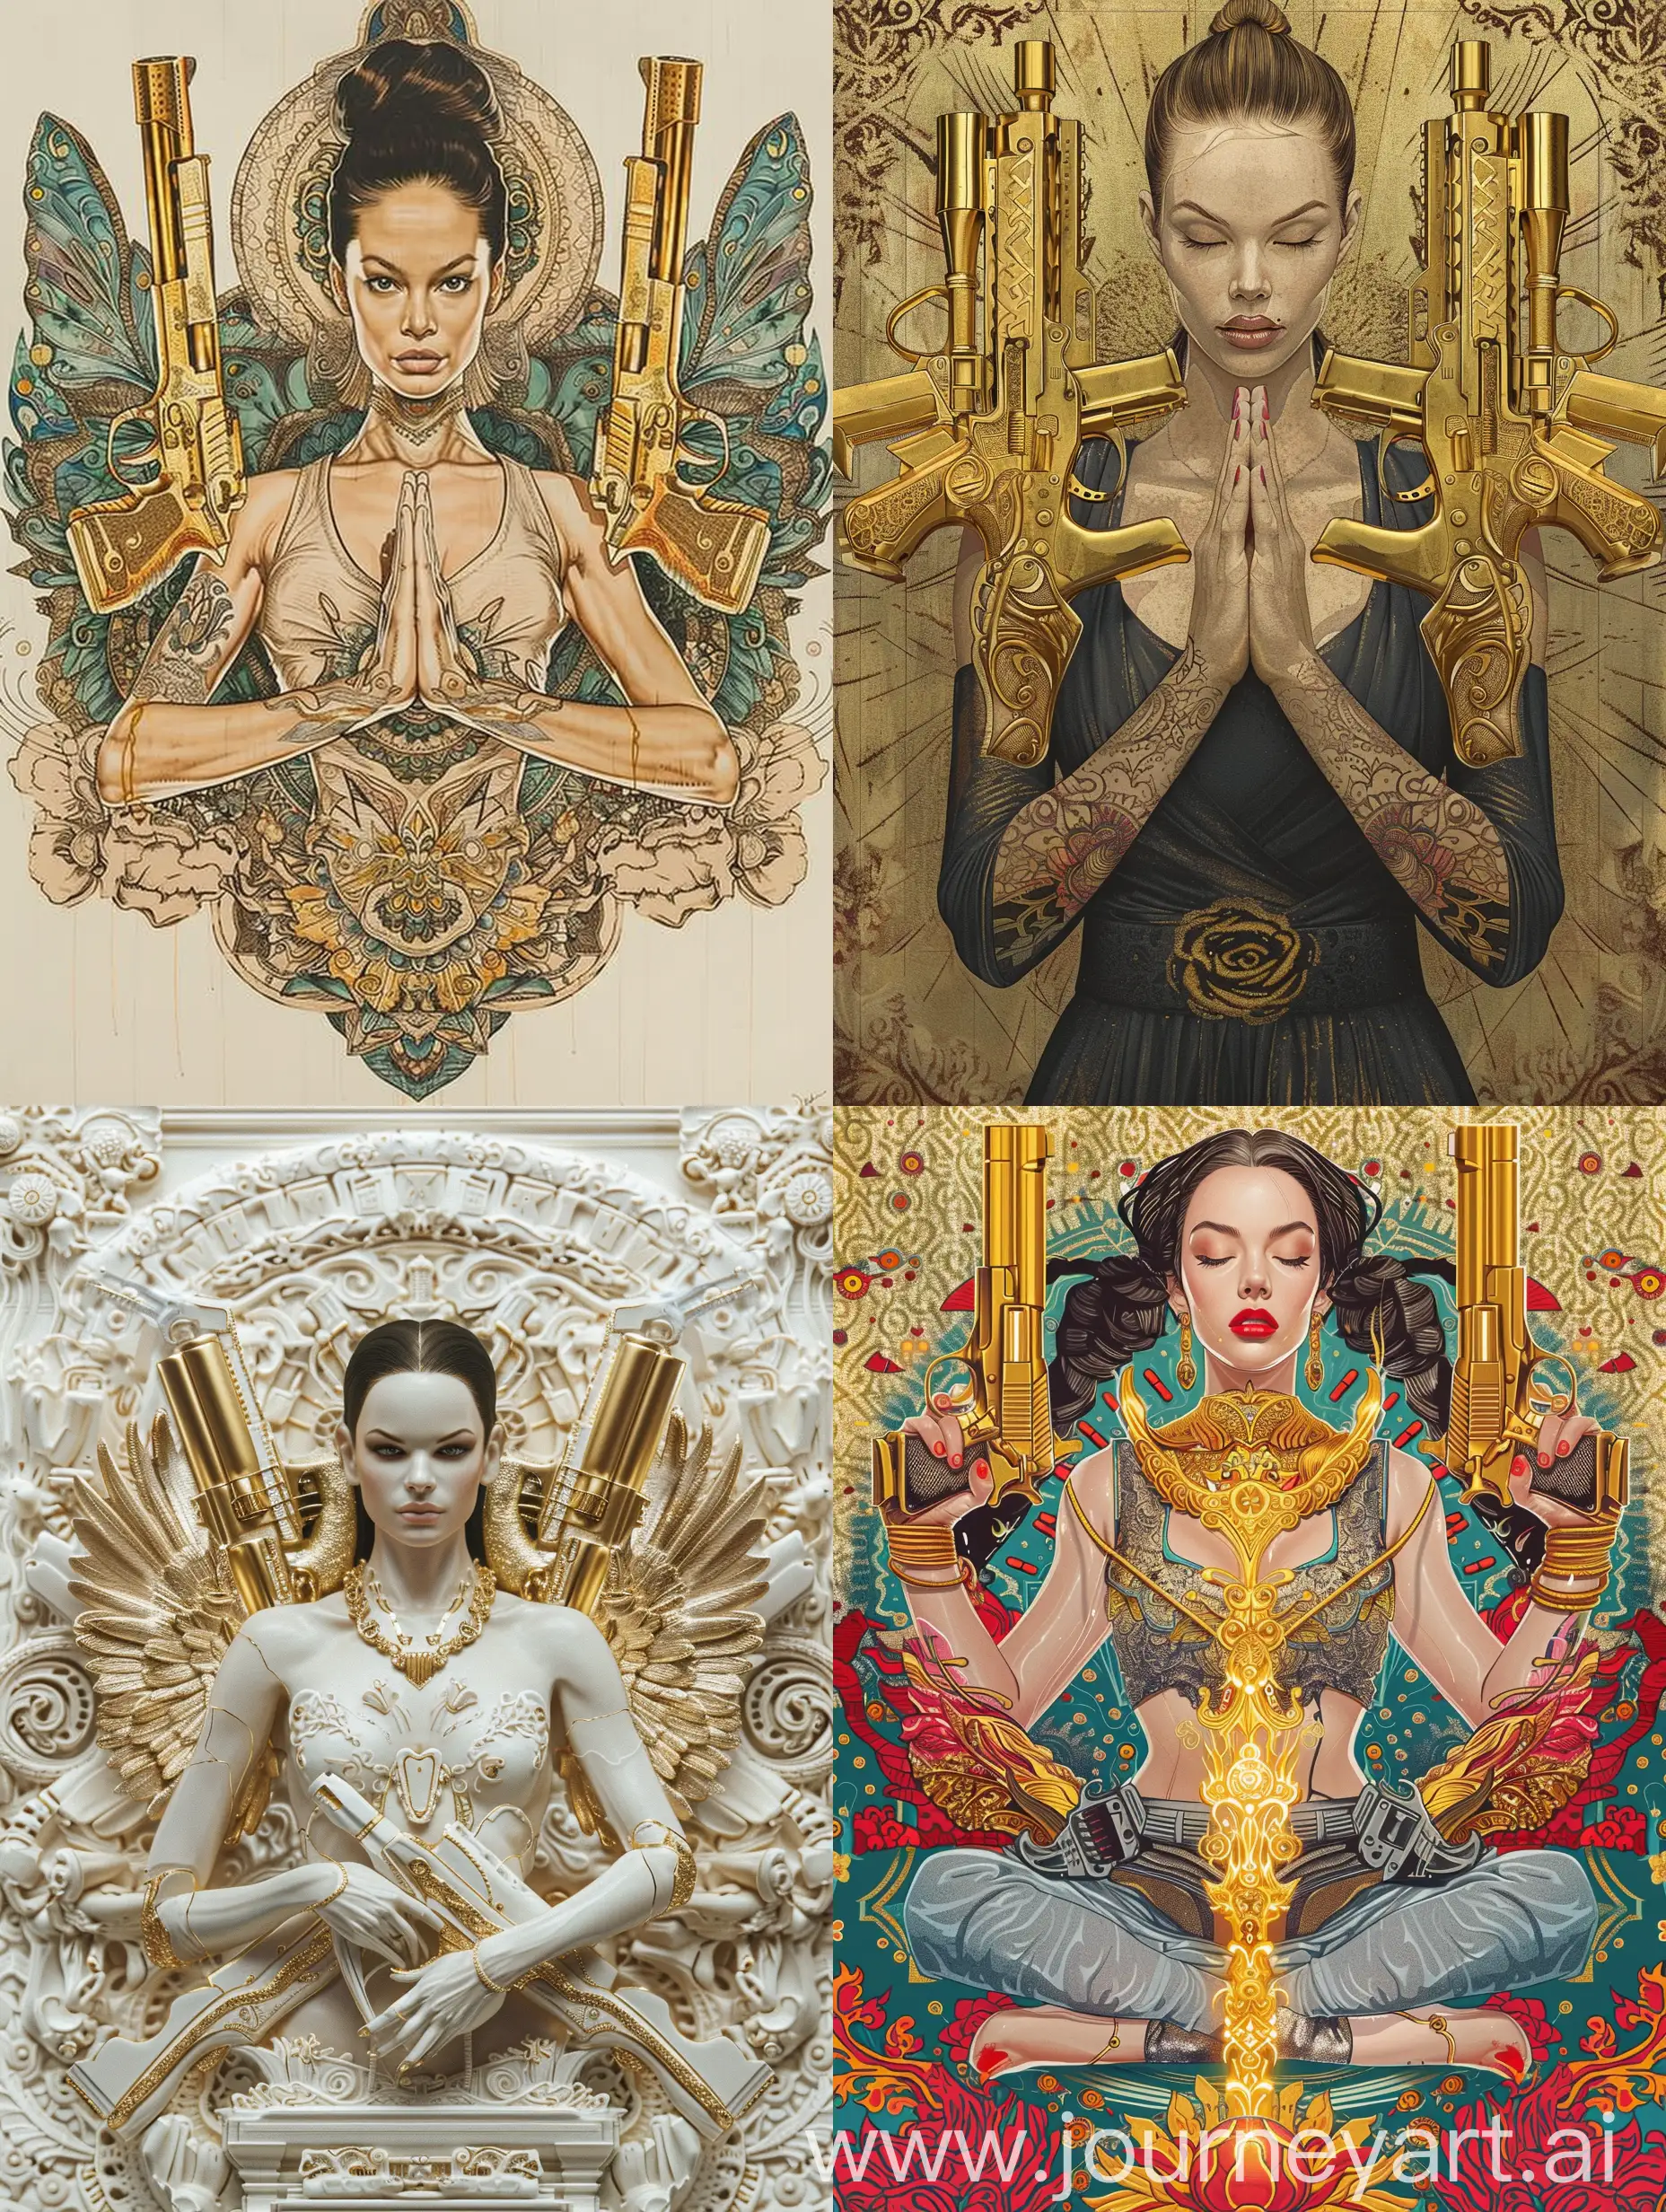 Angelina-Jolie-in-Lotus-Pose-with-Golden-Pistols-Intricate-Works-of-Tooth-Wu-Style-Art